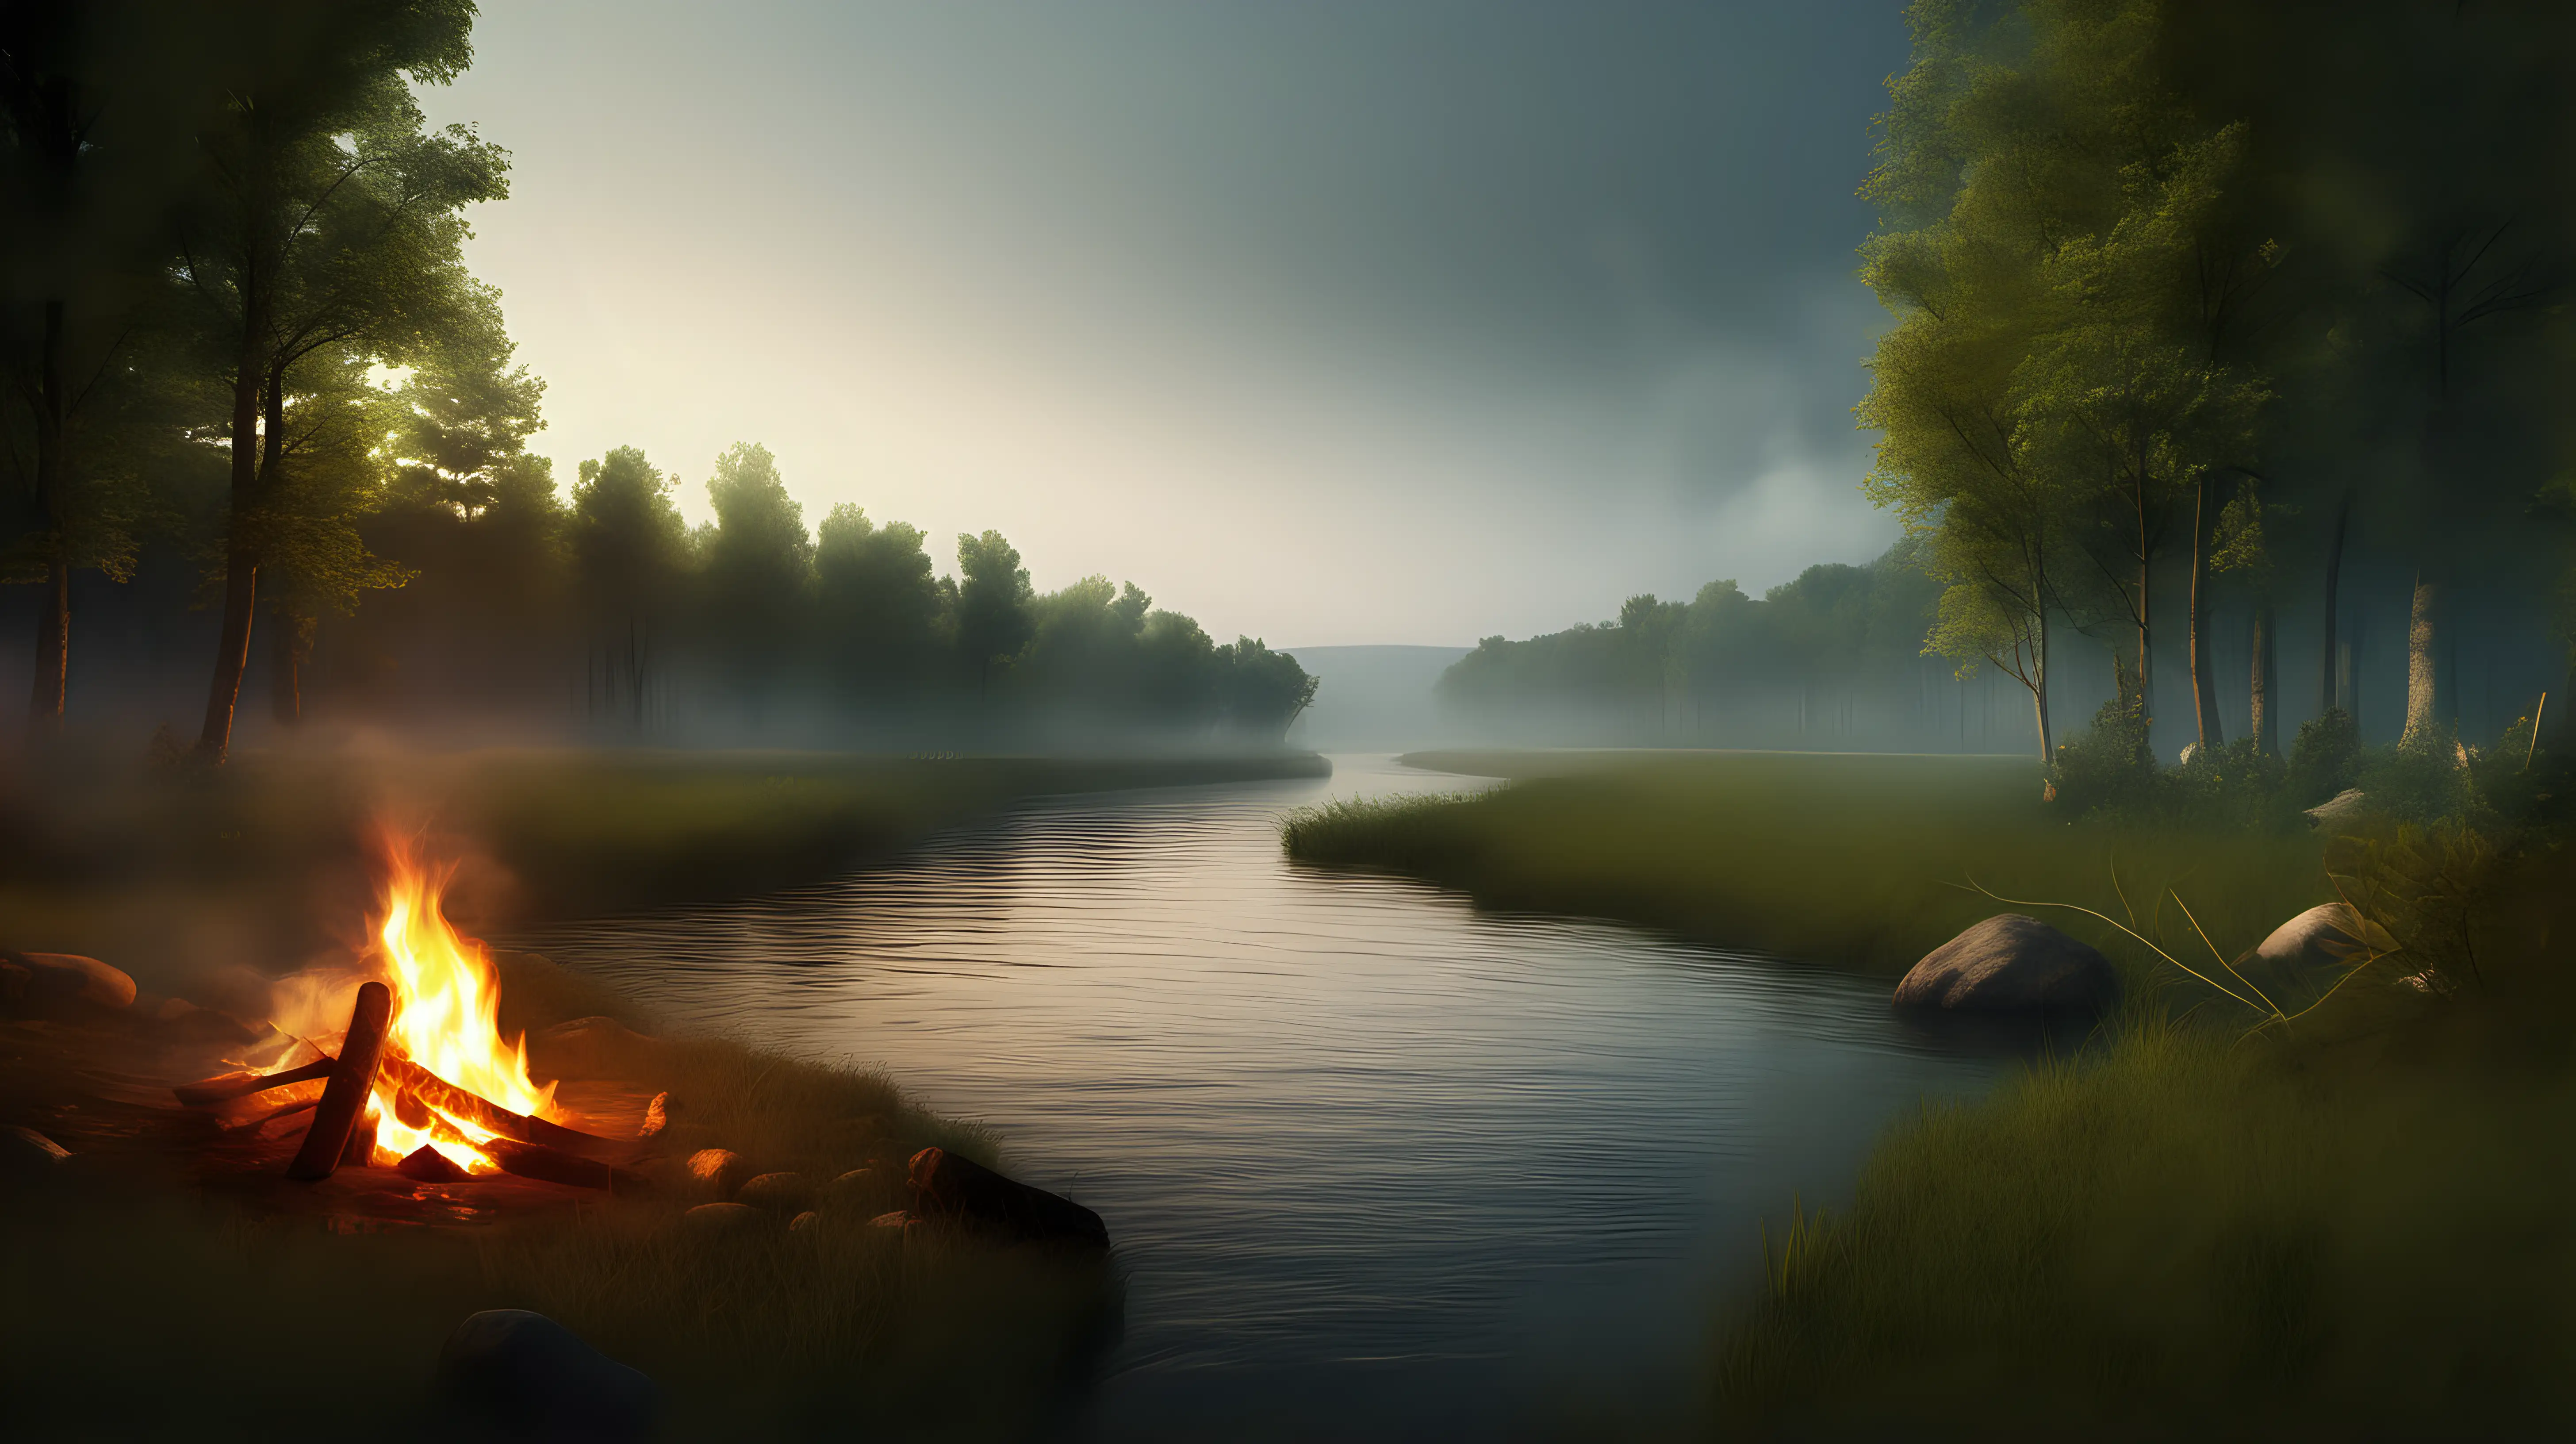 Scenic River Landscape with Distant Campfire Cooking Potatoes